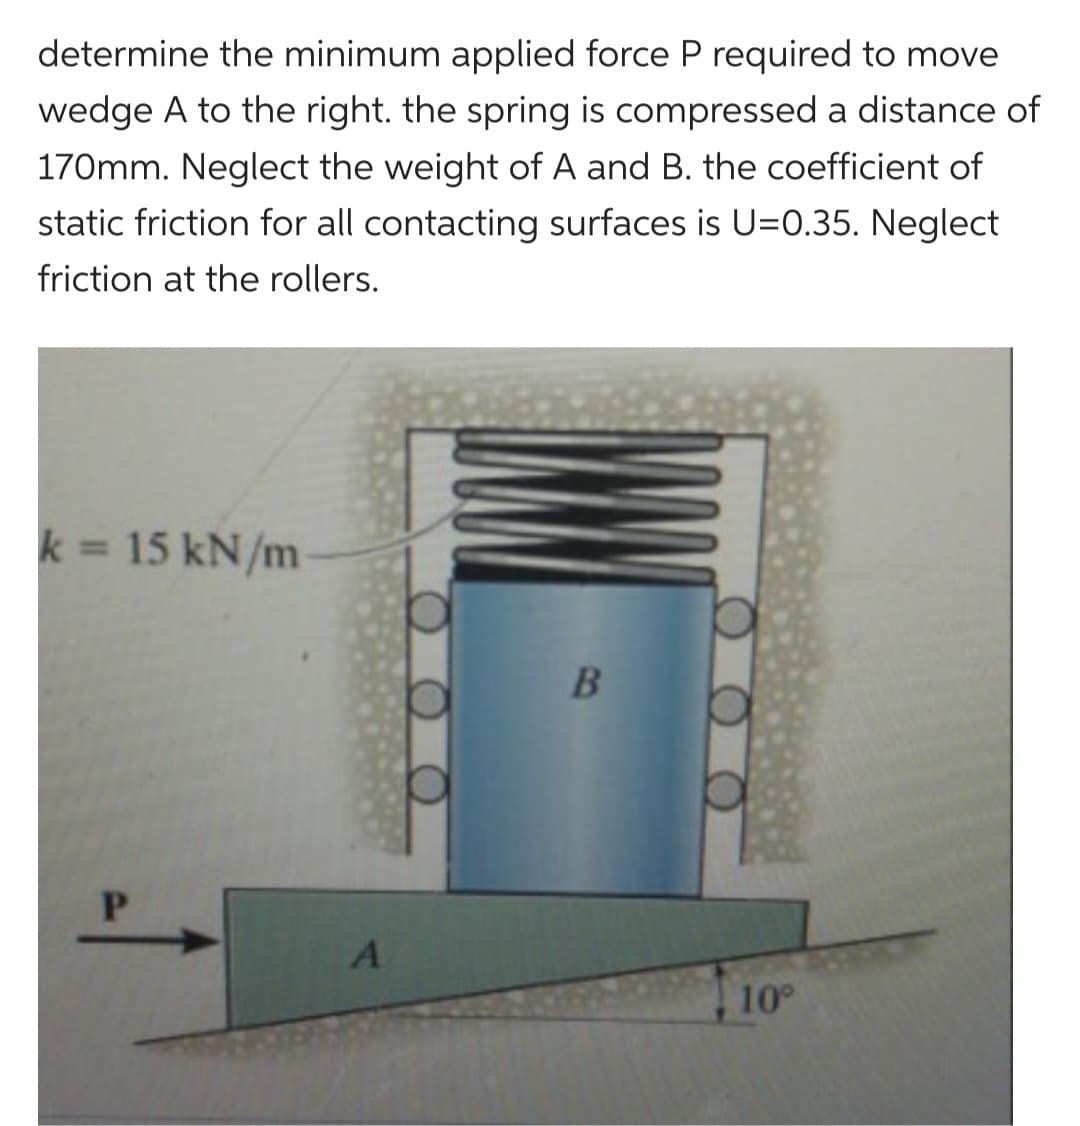 determine the minimum applied force P required to move
wedge A to the right. the spring is compressed a distance of
170mm. Neglect the weight of A and B. the coefficient of
static friction for all contacting surfaces is U=0.35. Neglect
friction at the rollers.
k= 15 kN/m
P
A
B
10°